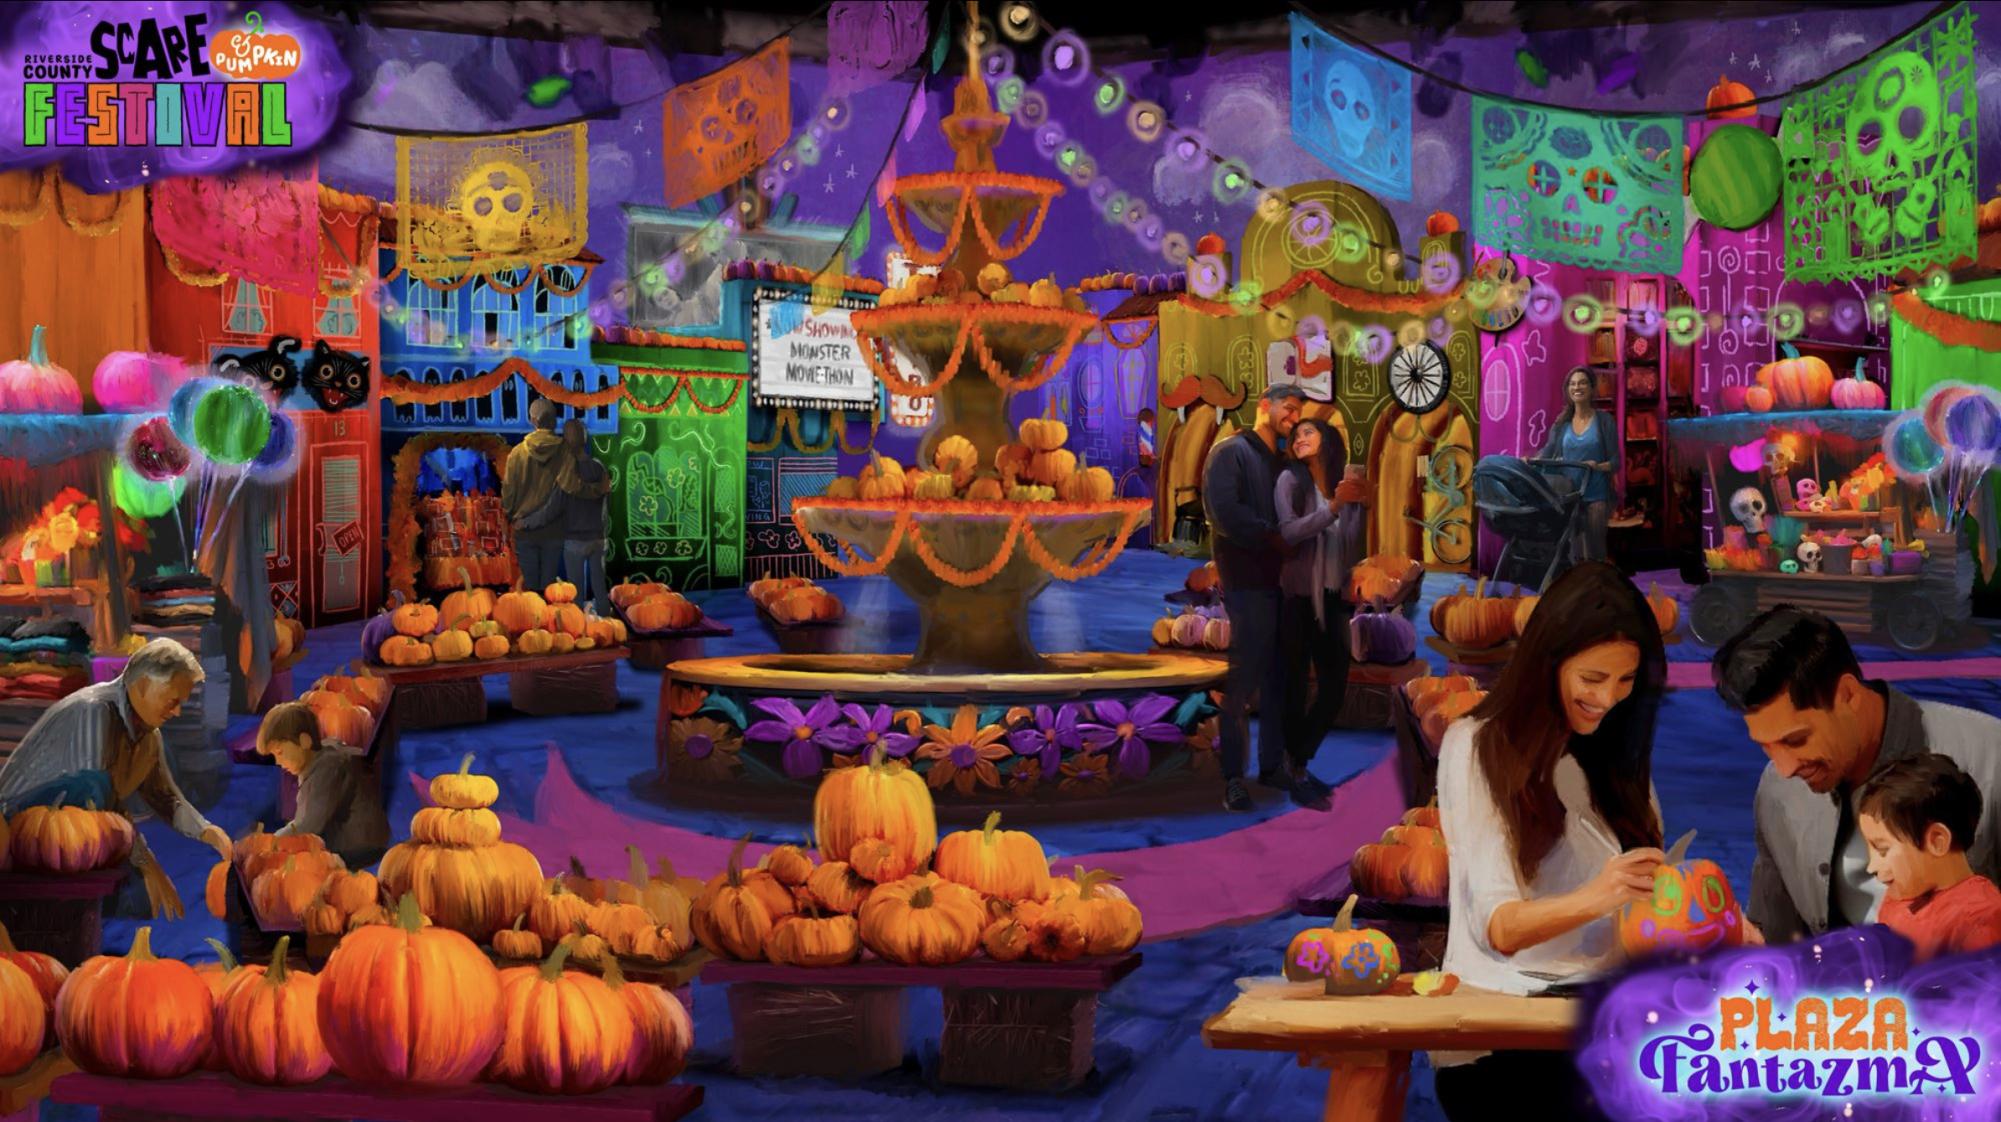 Photo courtesy of Riverside County Scare and Pumpkin Festival. Central town of Plaza Fantazma.